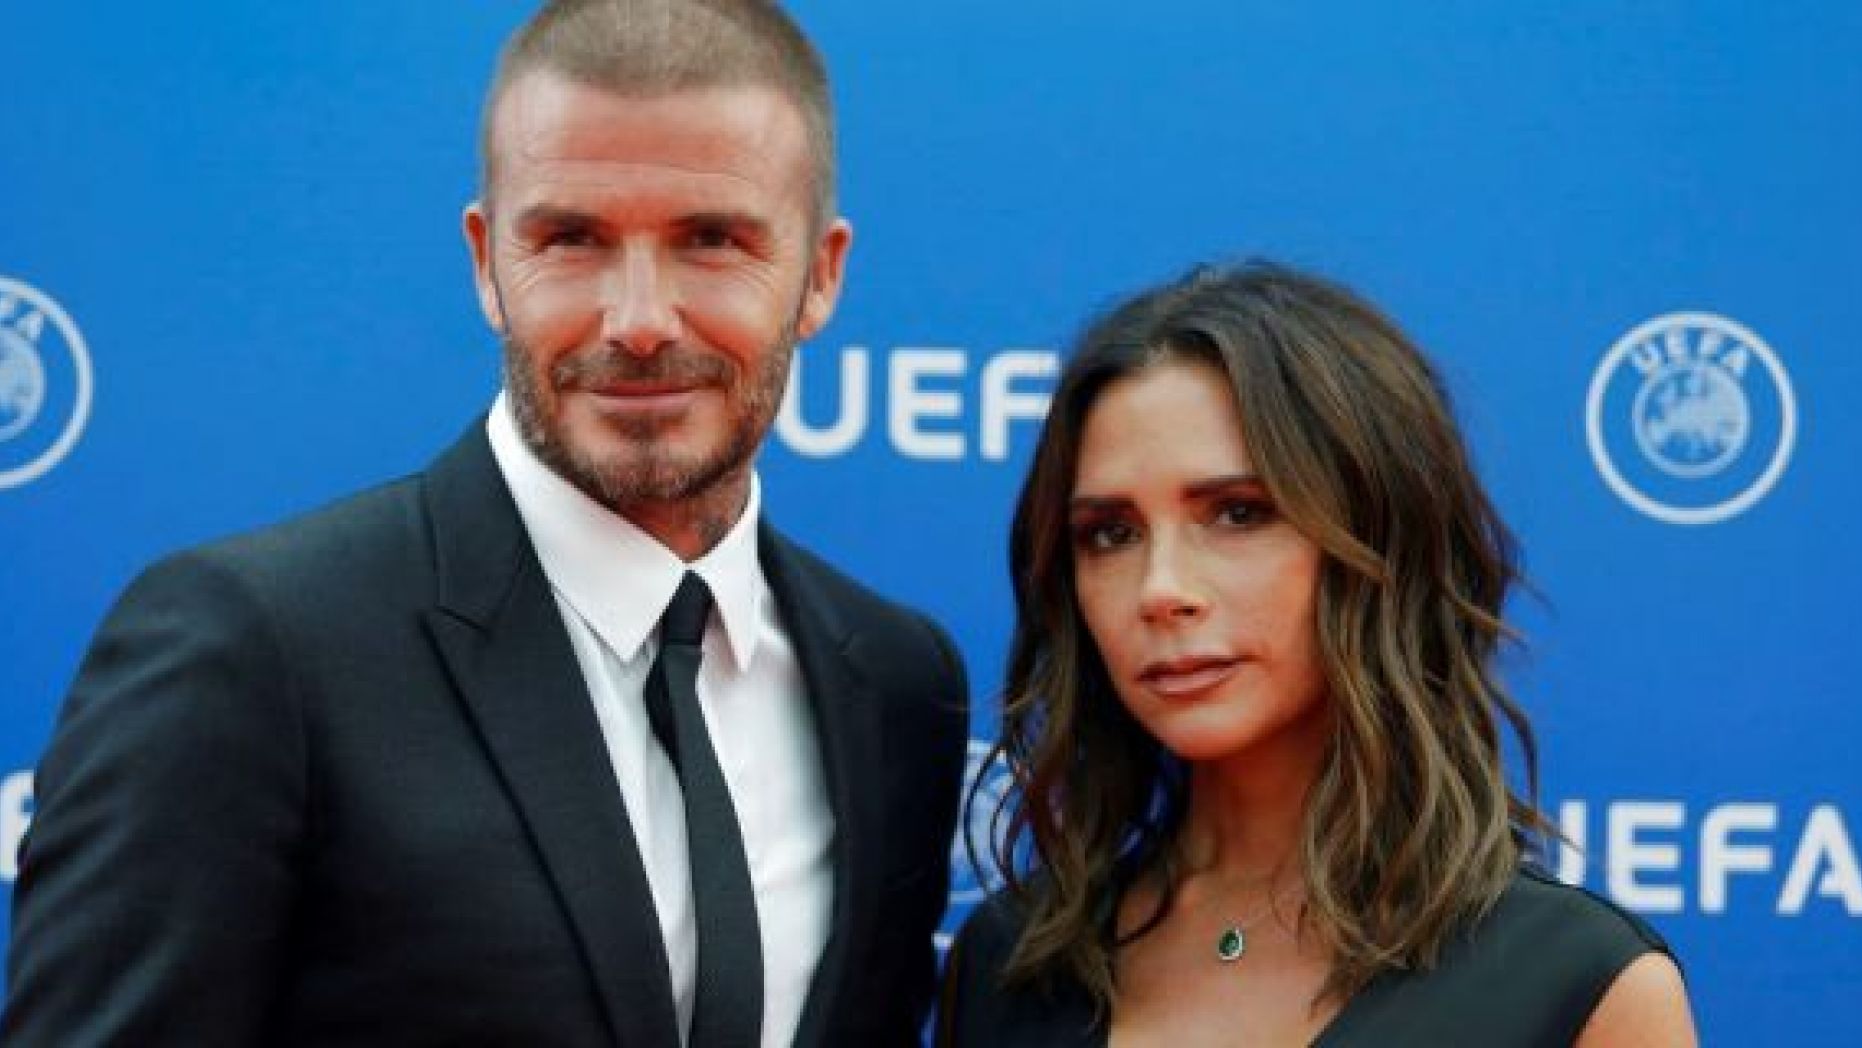 David Beckham says his and Victoria Beckham's marriage is "always hard work" in a new interview with "The Sunday Project" via The Mirror, which published a preview clip. 